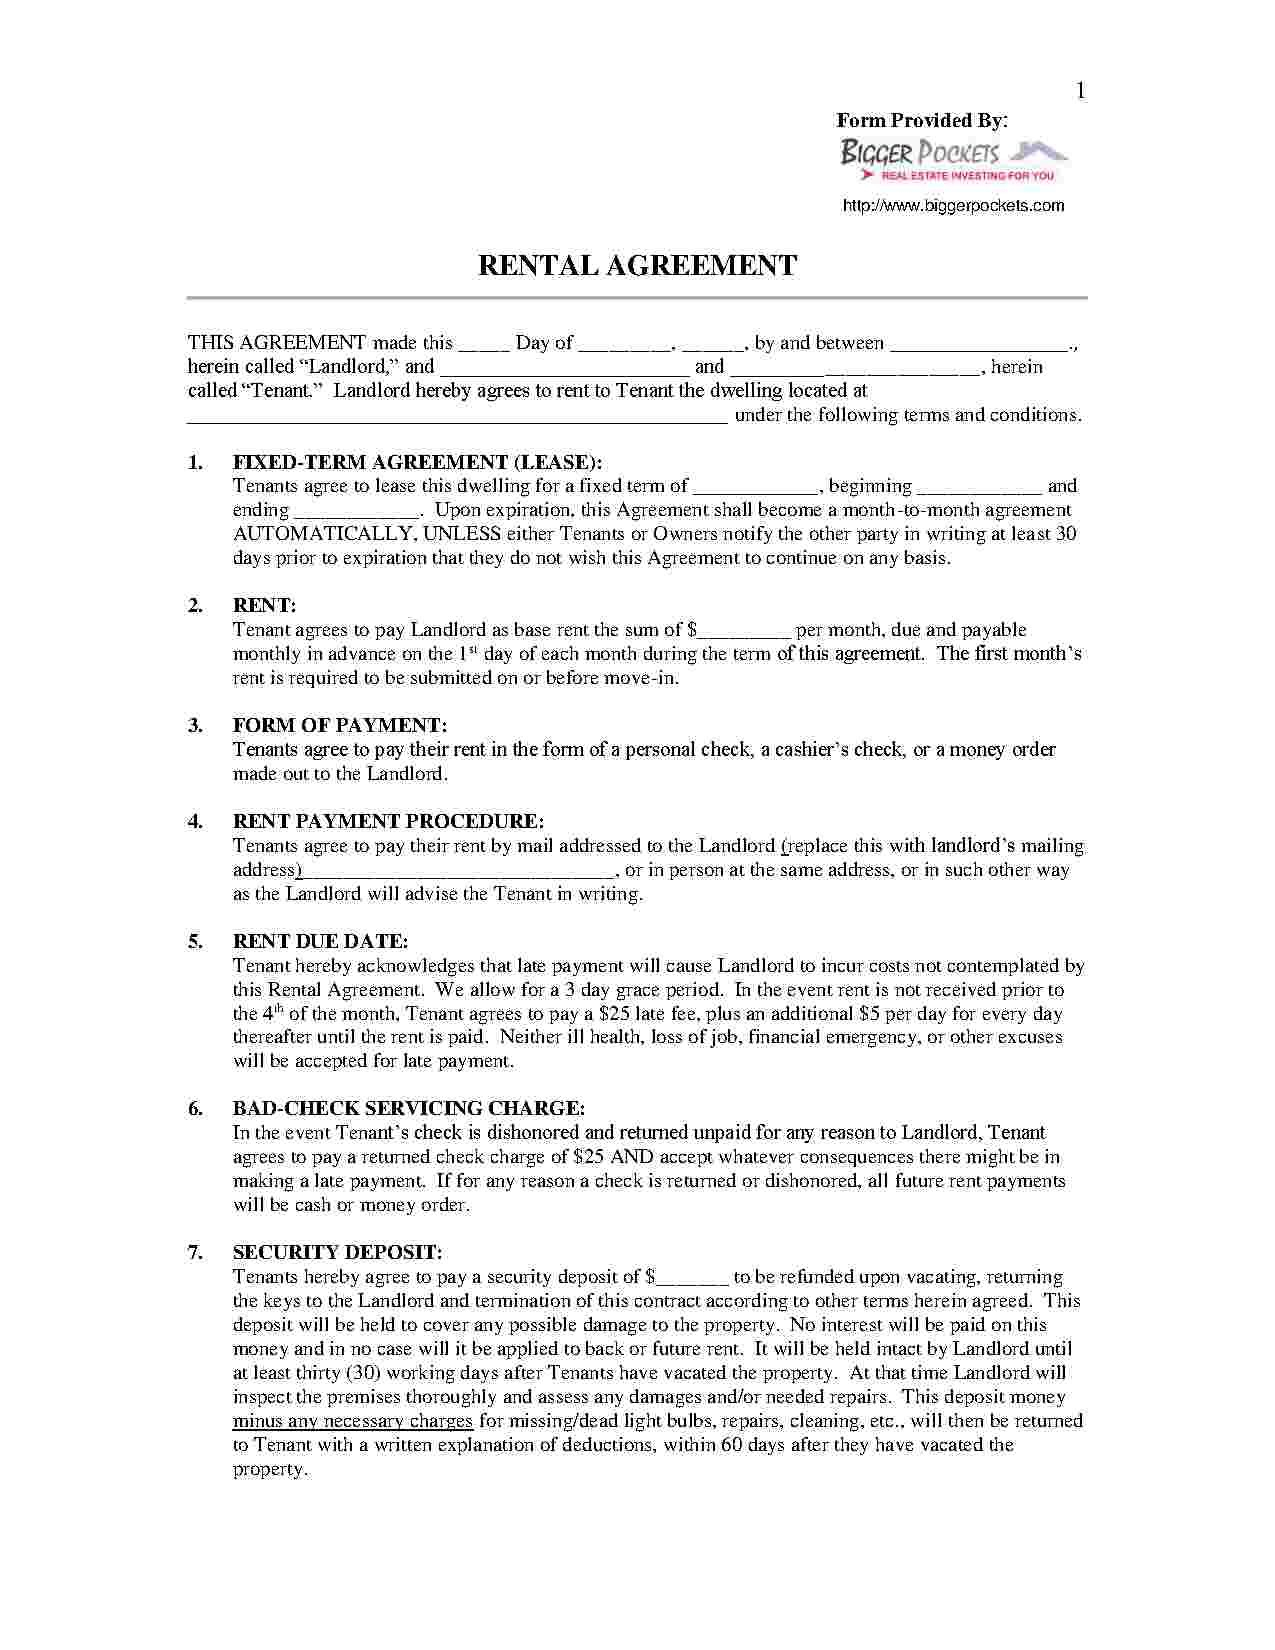 Download Pet Addendum To A Lease Agreement Style  Template For with regard to Pet Addendum To Lease Agreement Template